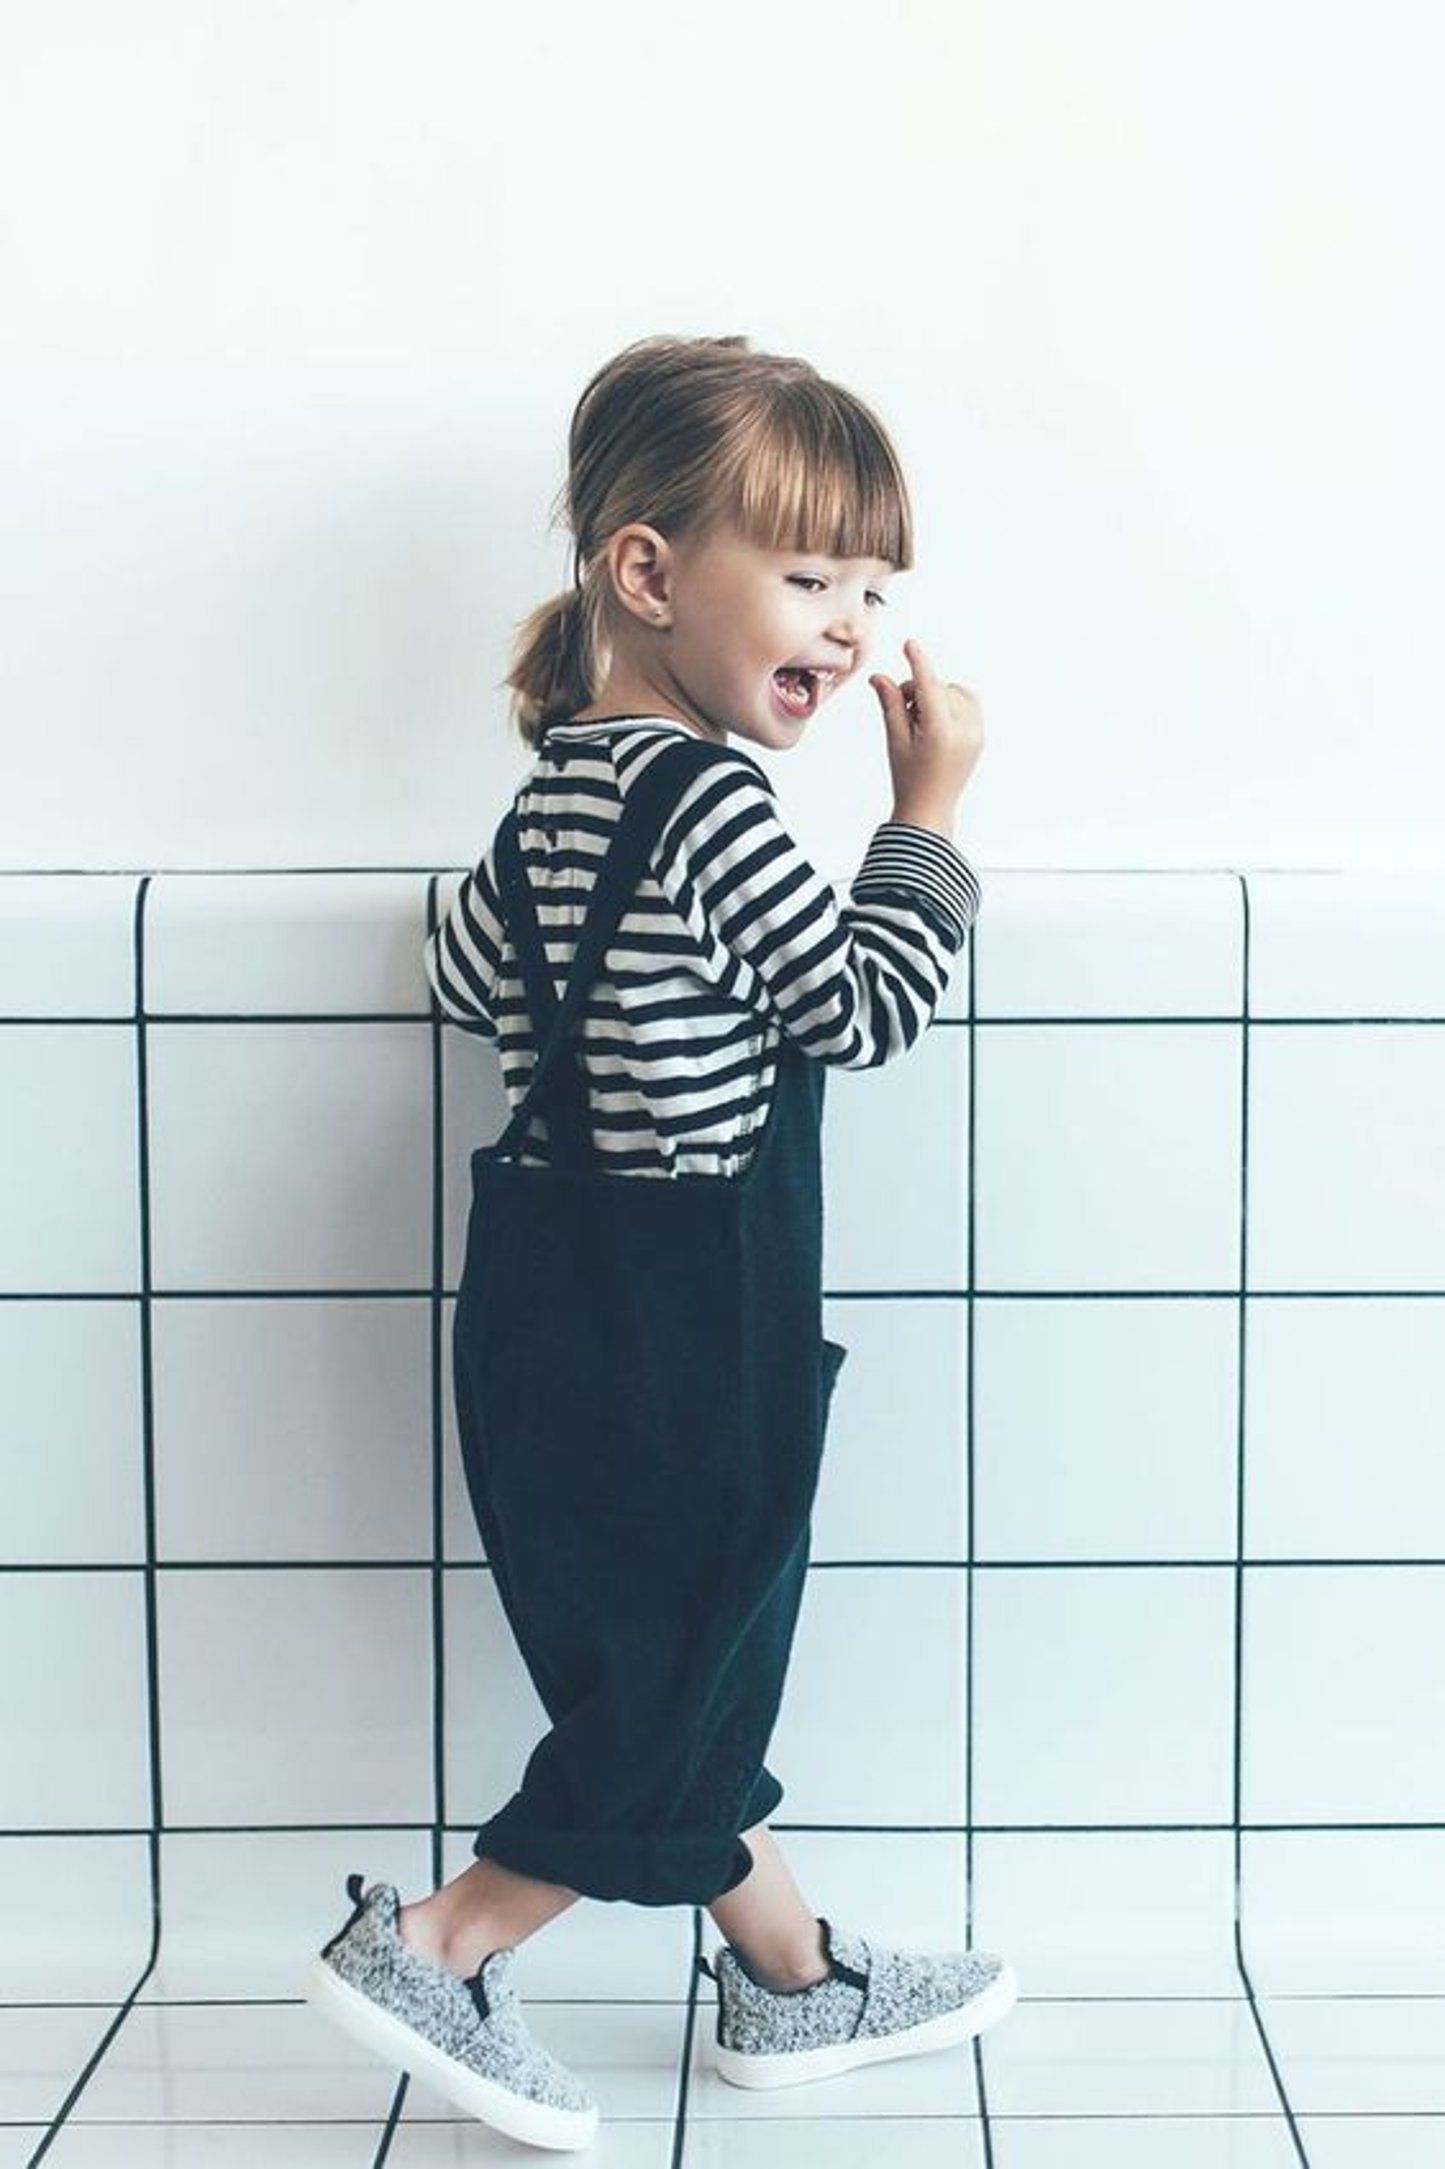 25 Of The Loveliest Girls Names Everyone Is Talking About - 25 Of The Loveliest Girls Names Everyone Is Talking About -   17 baby style Girl ideas